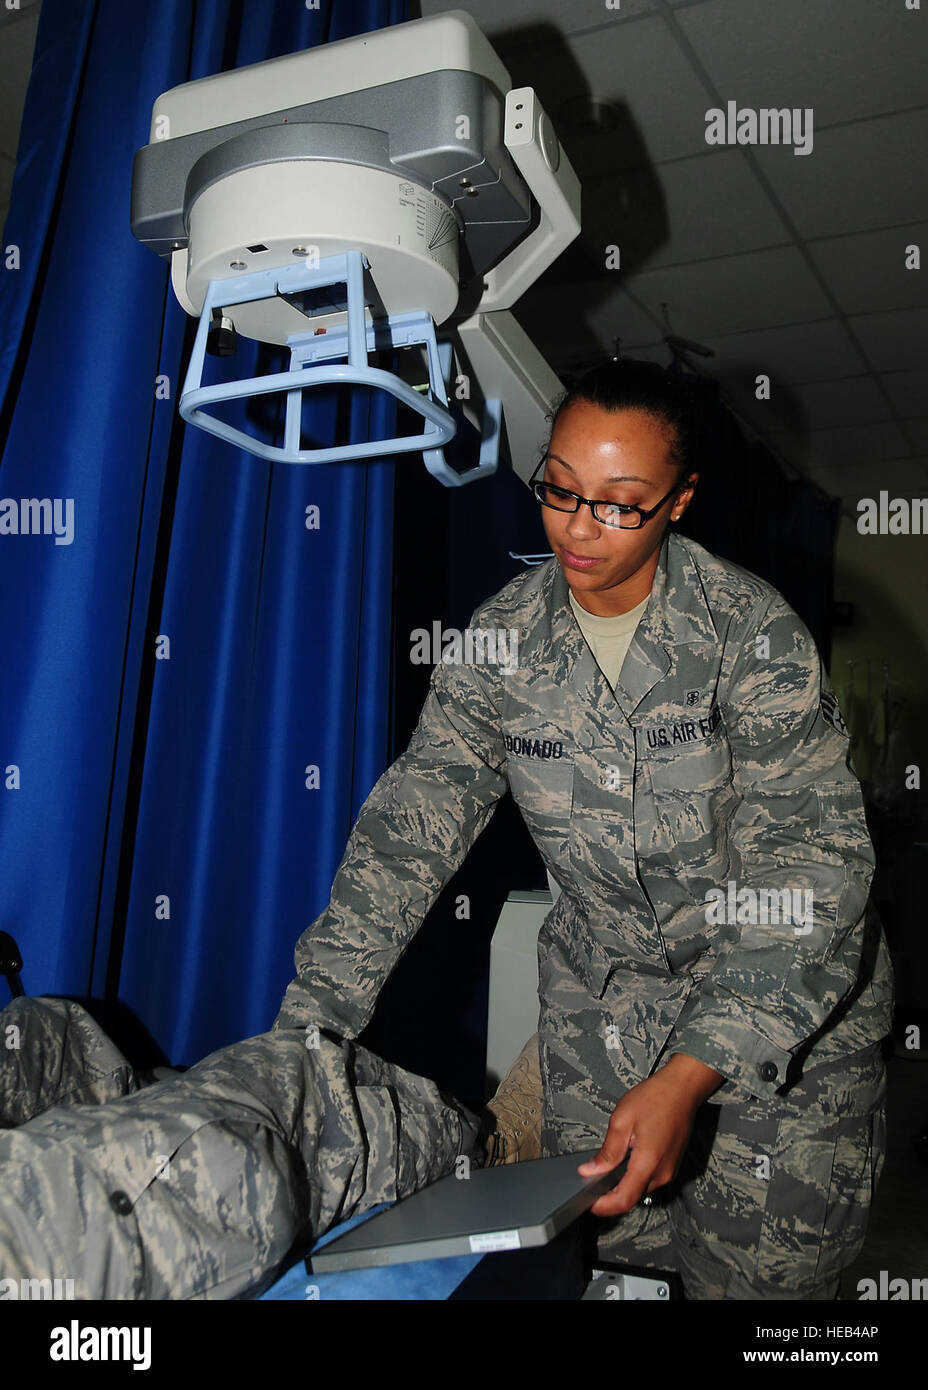 SOUTHWEST ASIA -- Senior Airman Ashli Maldonado, 386th Expeditionary Medical Support x-ray technician, prepares a patient for a knee x-ray at an undisclosed location in Southwest Asia Oct. 27, 2009.  Airman Maldonado is deployed from the 81st Medical Operations Squadron, Keesler Air Force Base, Miss., and hails from Colorado Springs, Colo.  Tech. Sgt. Tony Tolley) Stock Photo